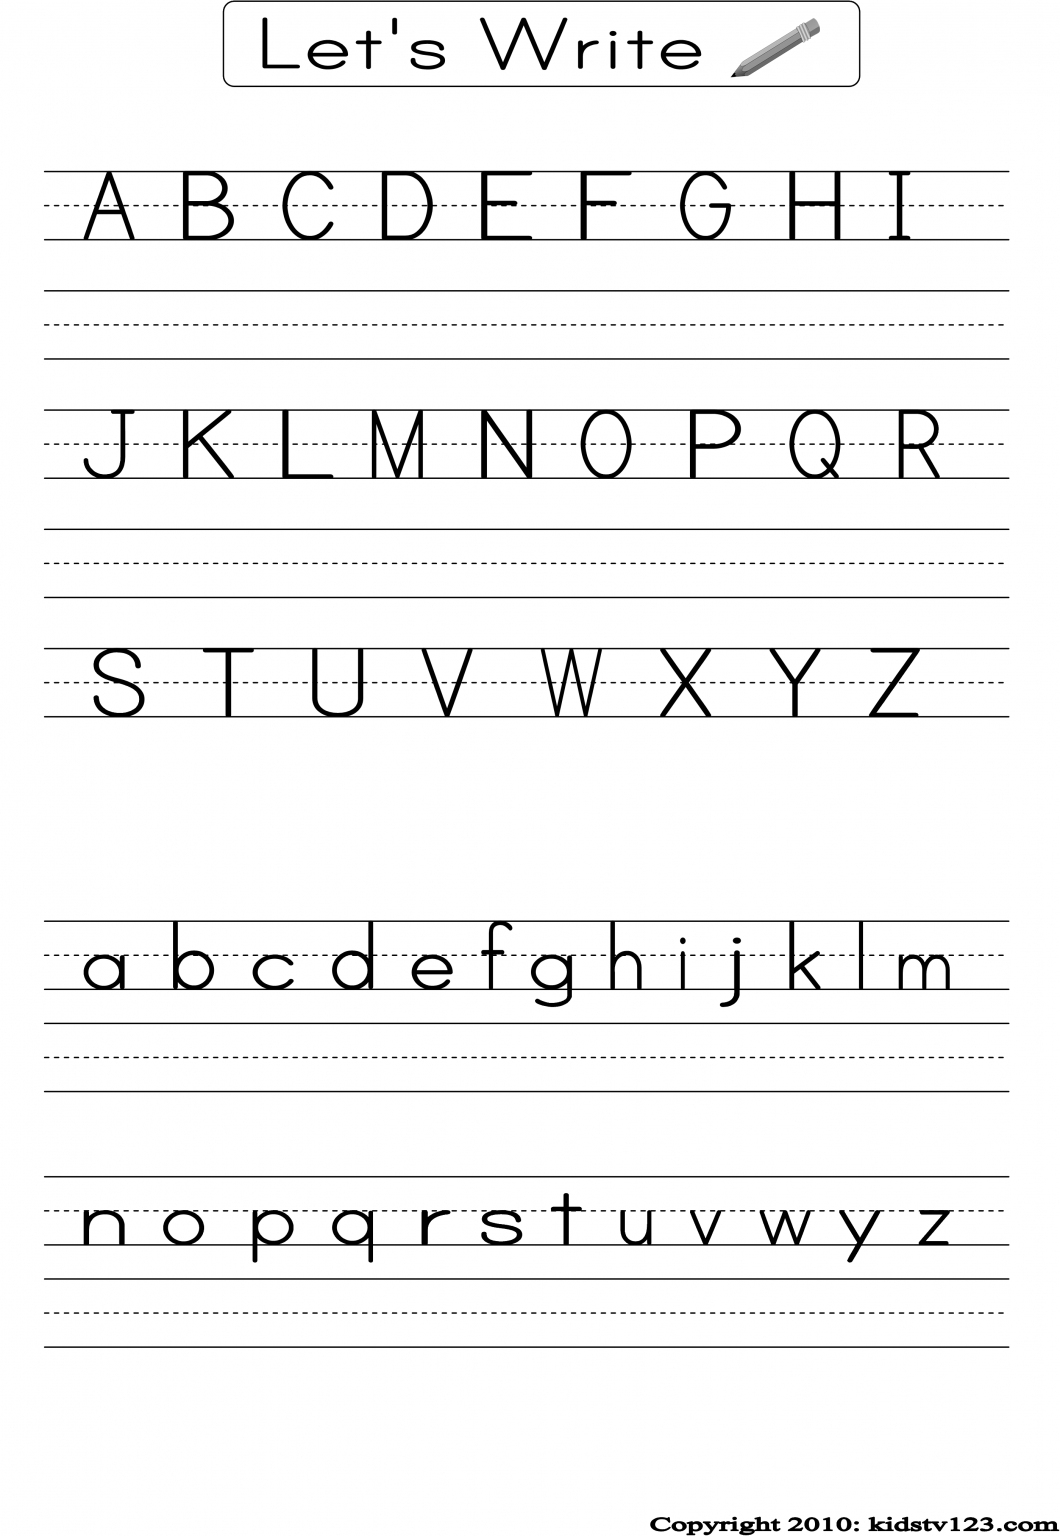 Free Preschool Writing Worksheets – With Printables For Kindergarten | Free Printable Writing Worksheets